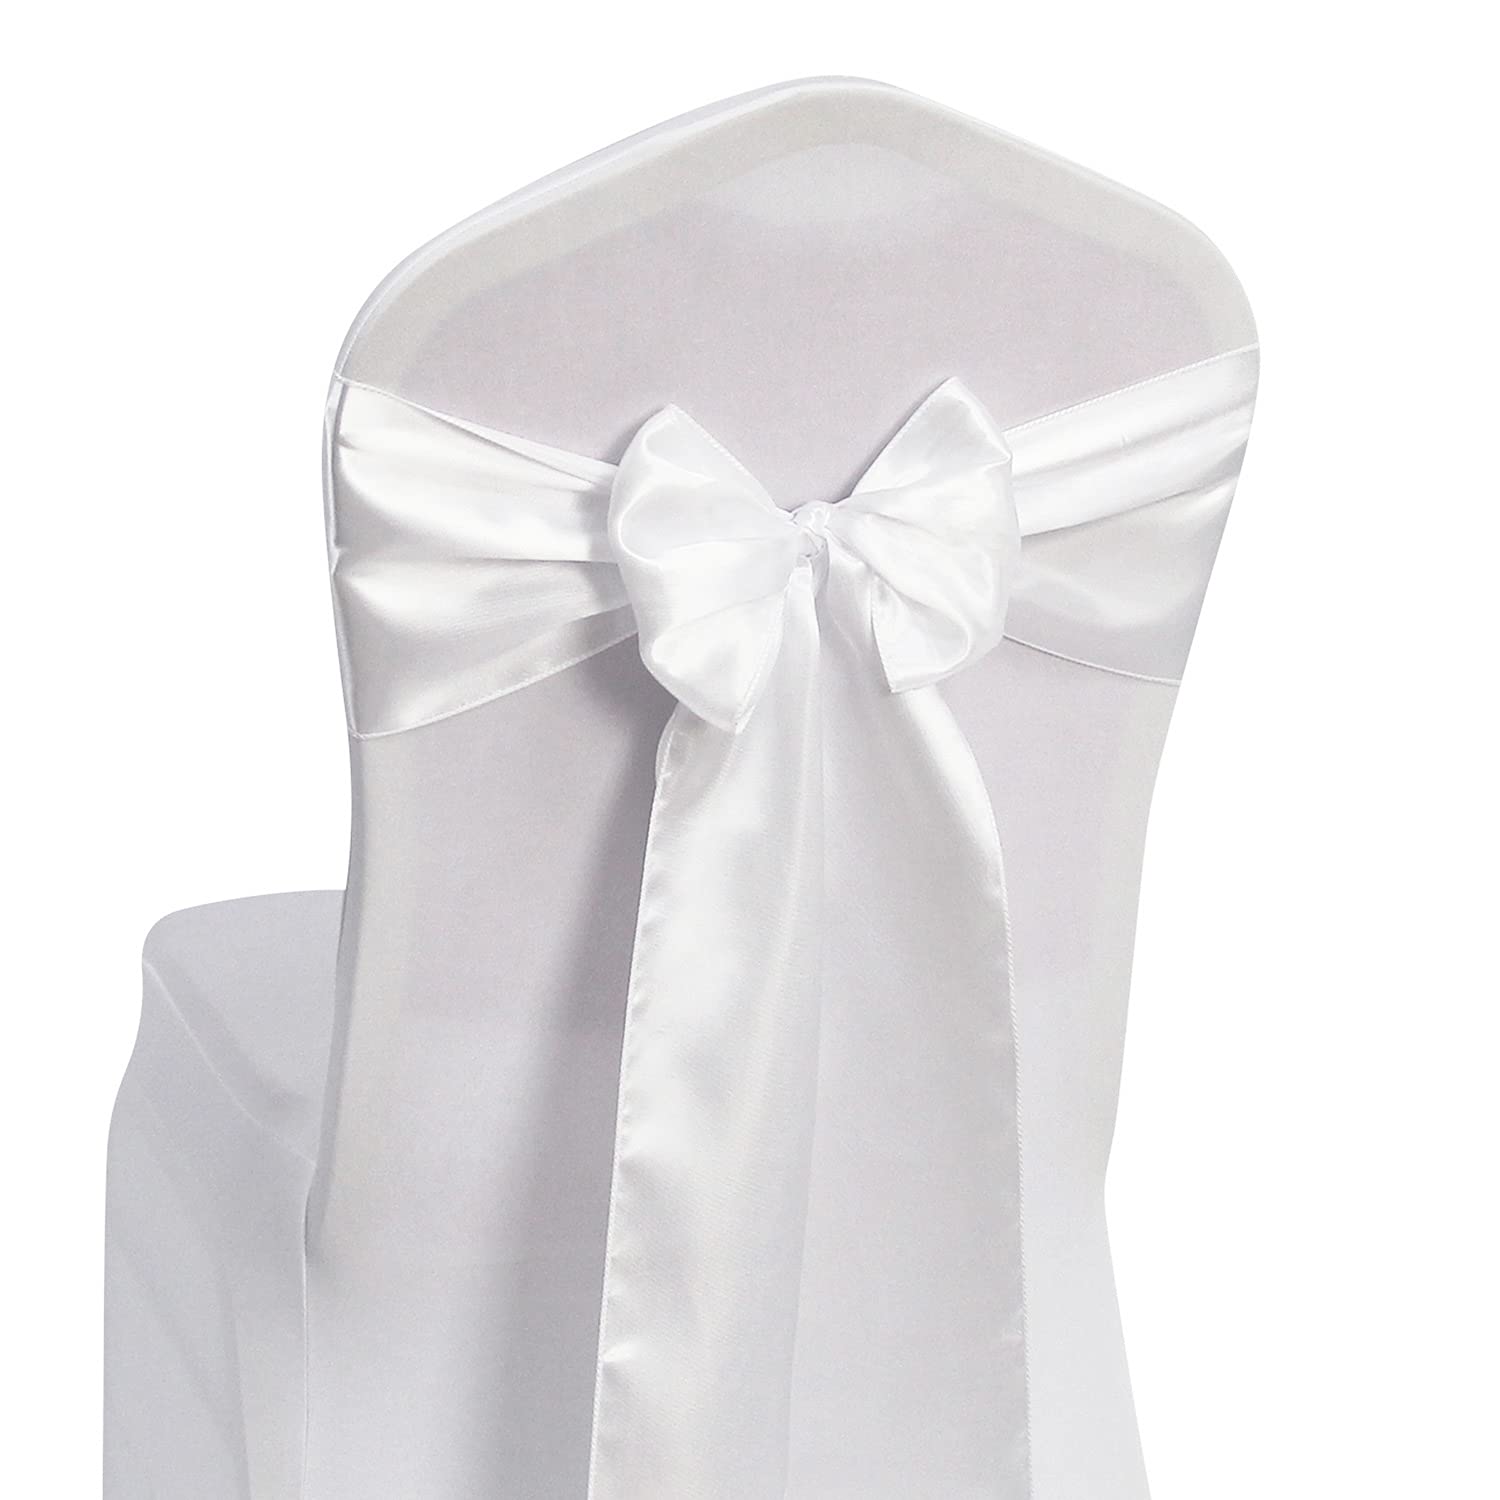 Welmatch White Satin Chair Sashes Ties 12 Pcs Wedding Banquet Party Event Decoration Chair Bows (White, 12)